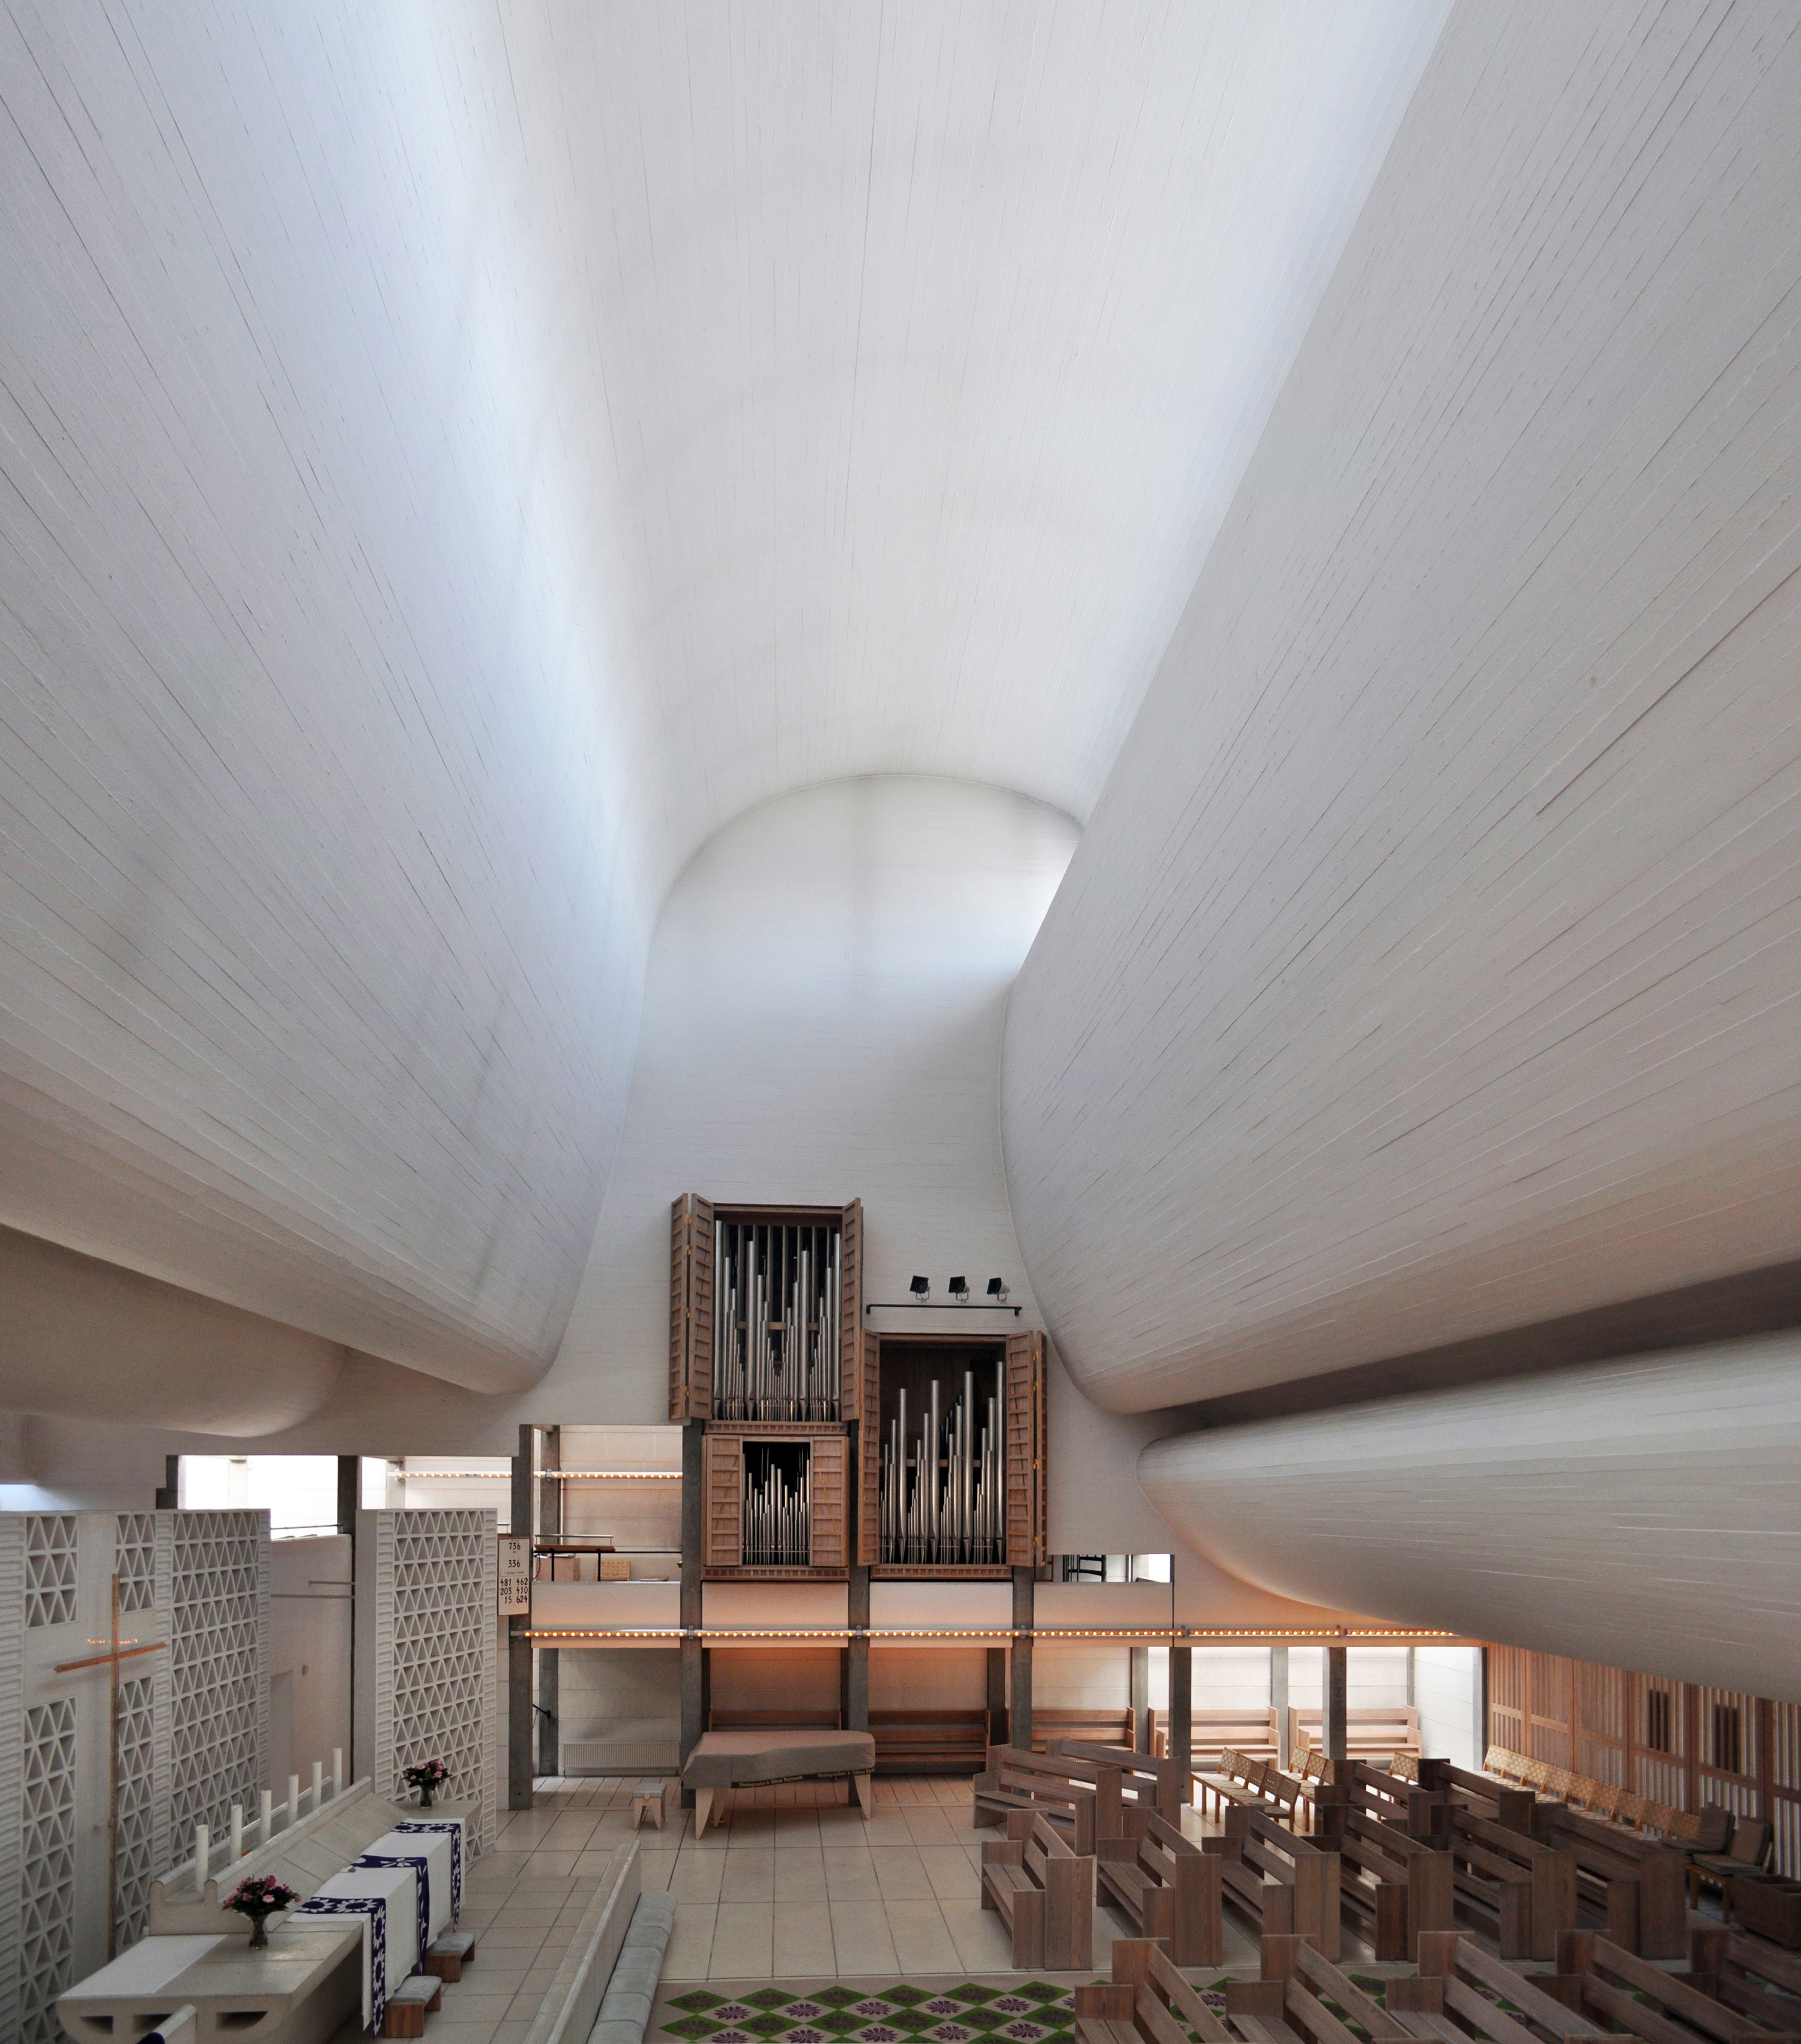 Inside of a church/a chapel, very white coloured. Looks quite closed with not much space since the walls on the sides are arching in.At the back theres an organ. There are also rows of benches to sit.